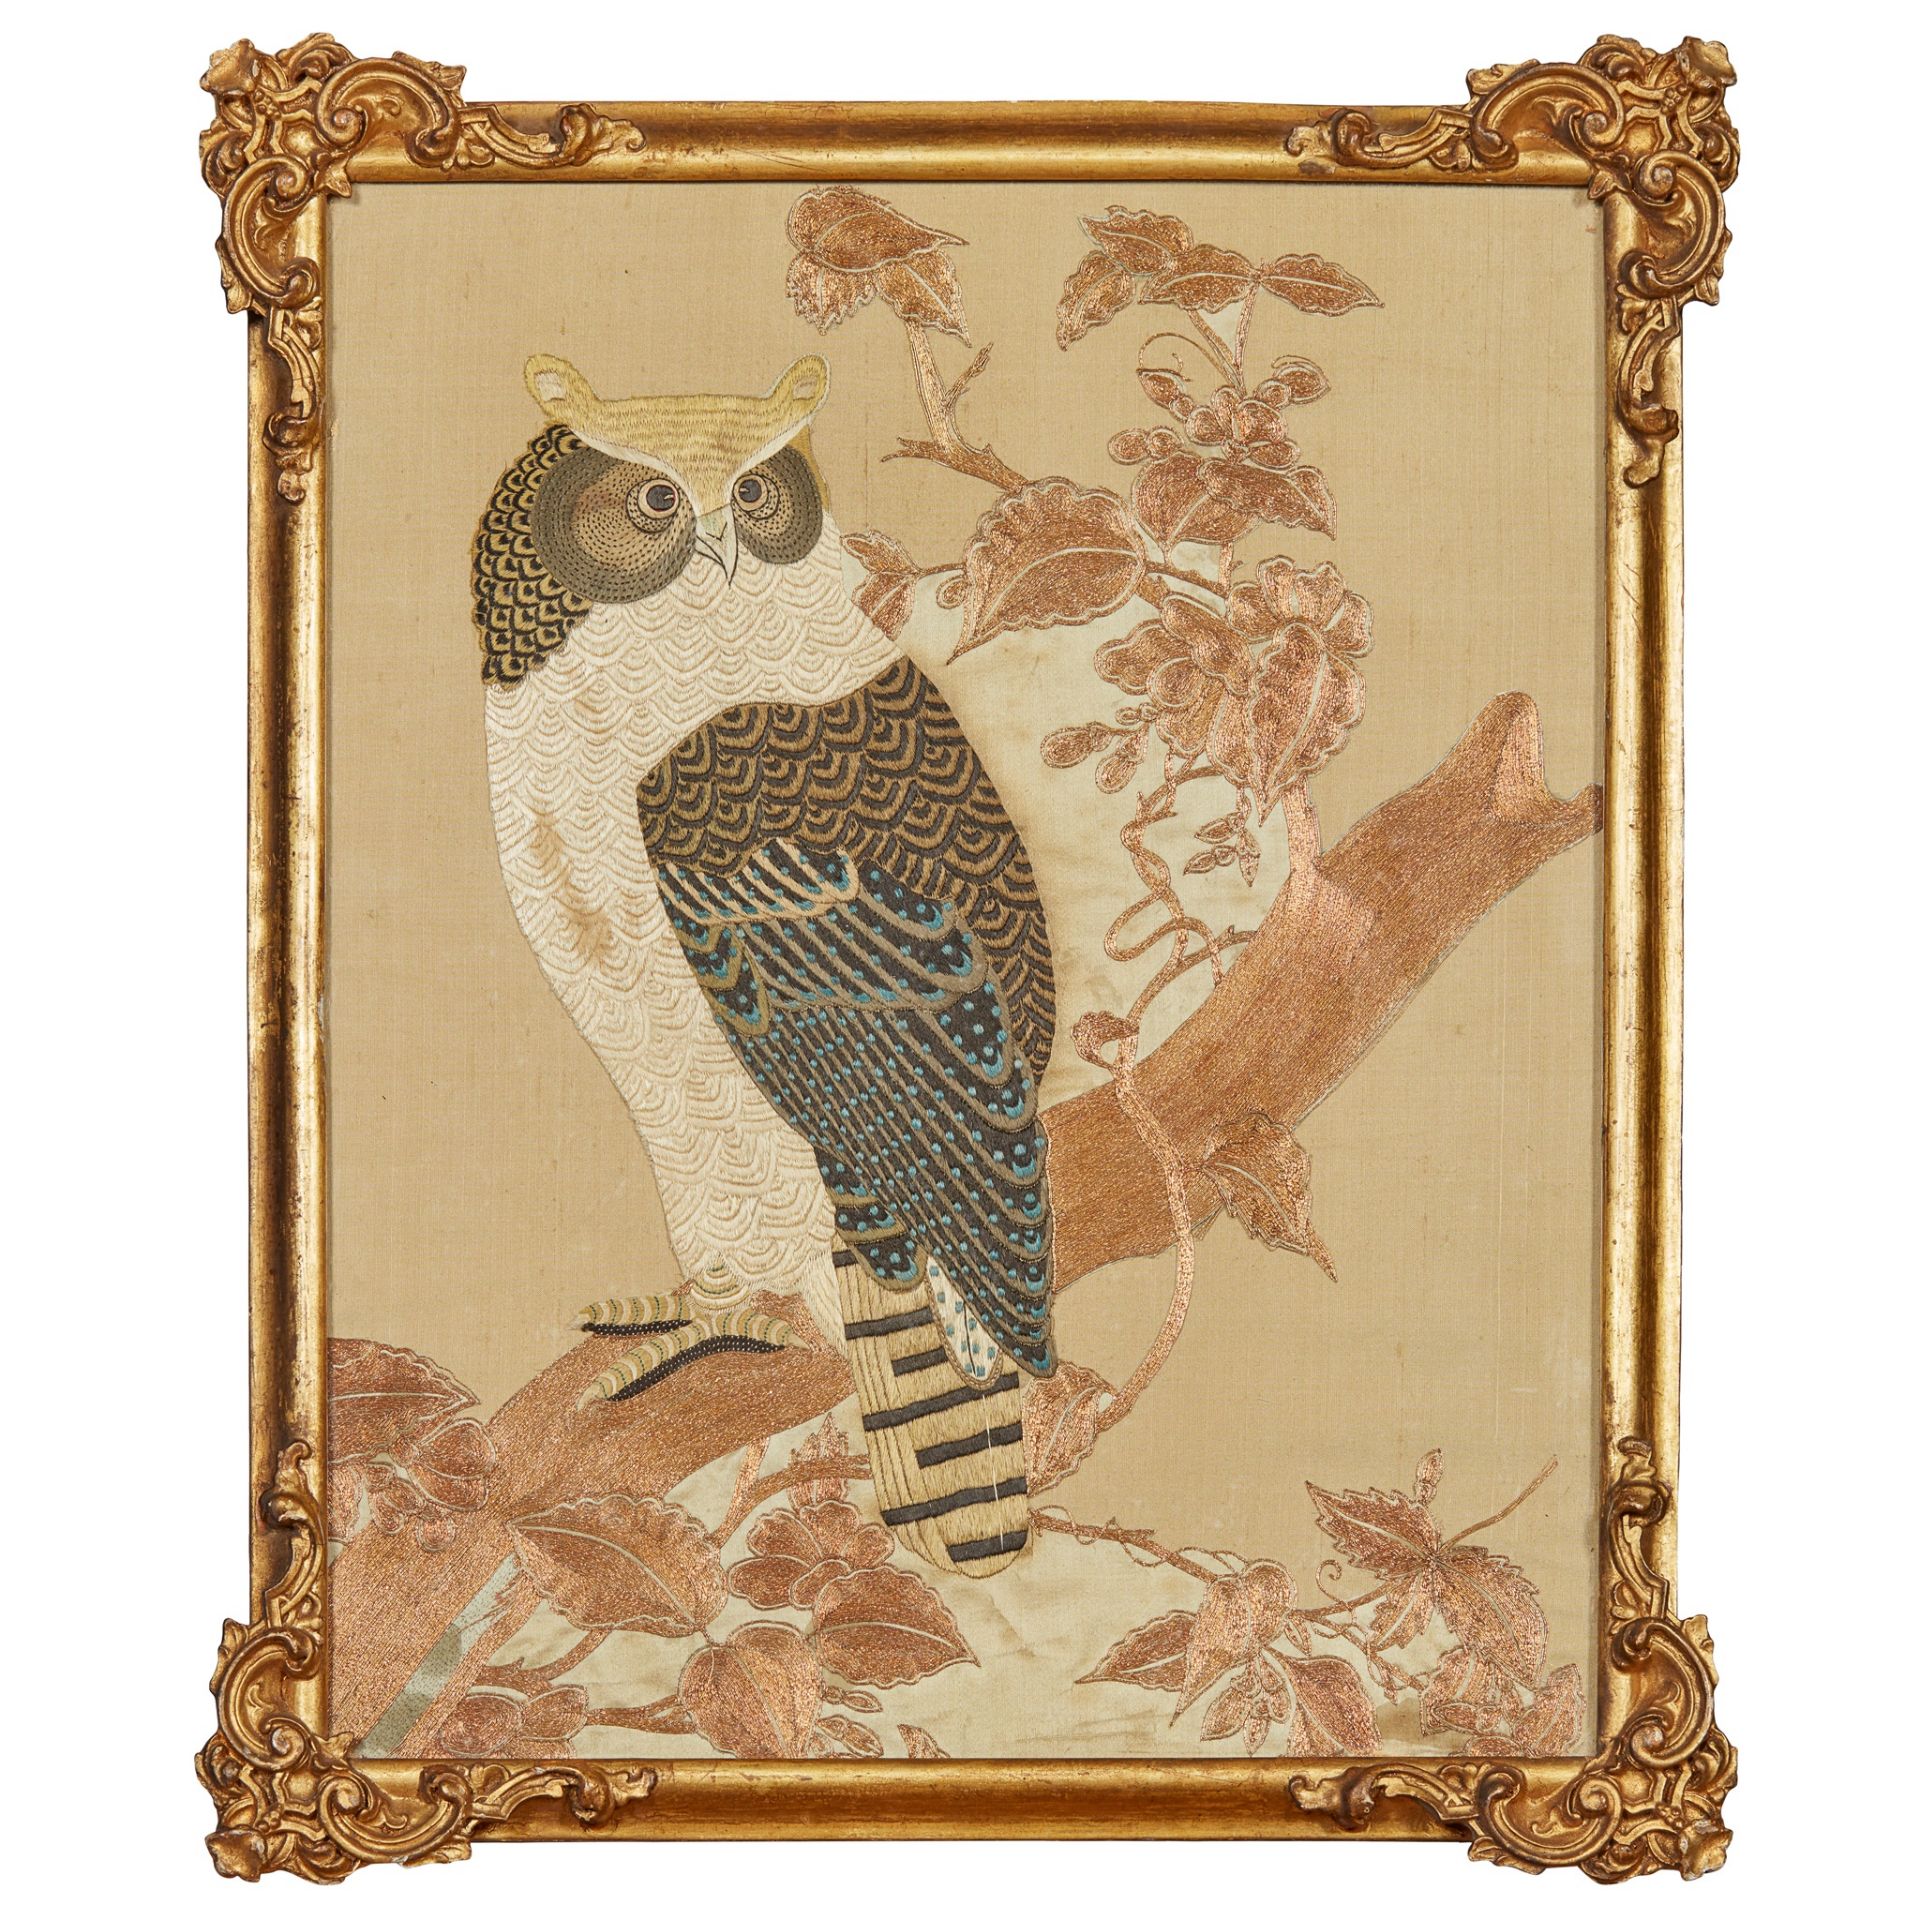 JAPANESE EMBROIDERED PANEL OF AN OWL, MEIJI PERIOD CIRCA 1880 - Image 2 of 3